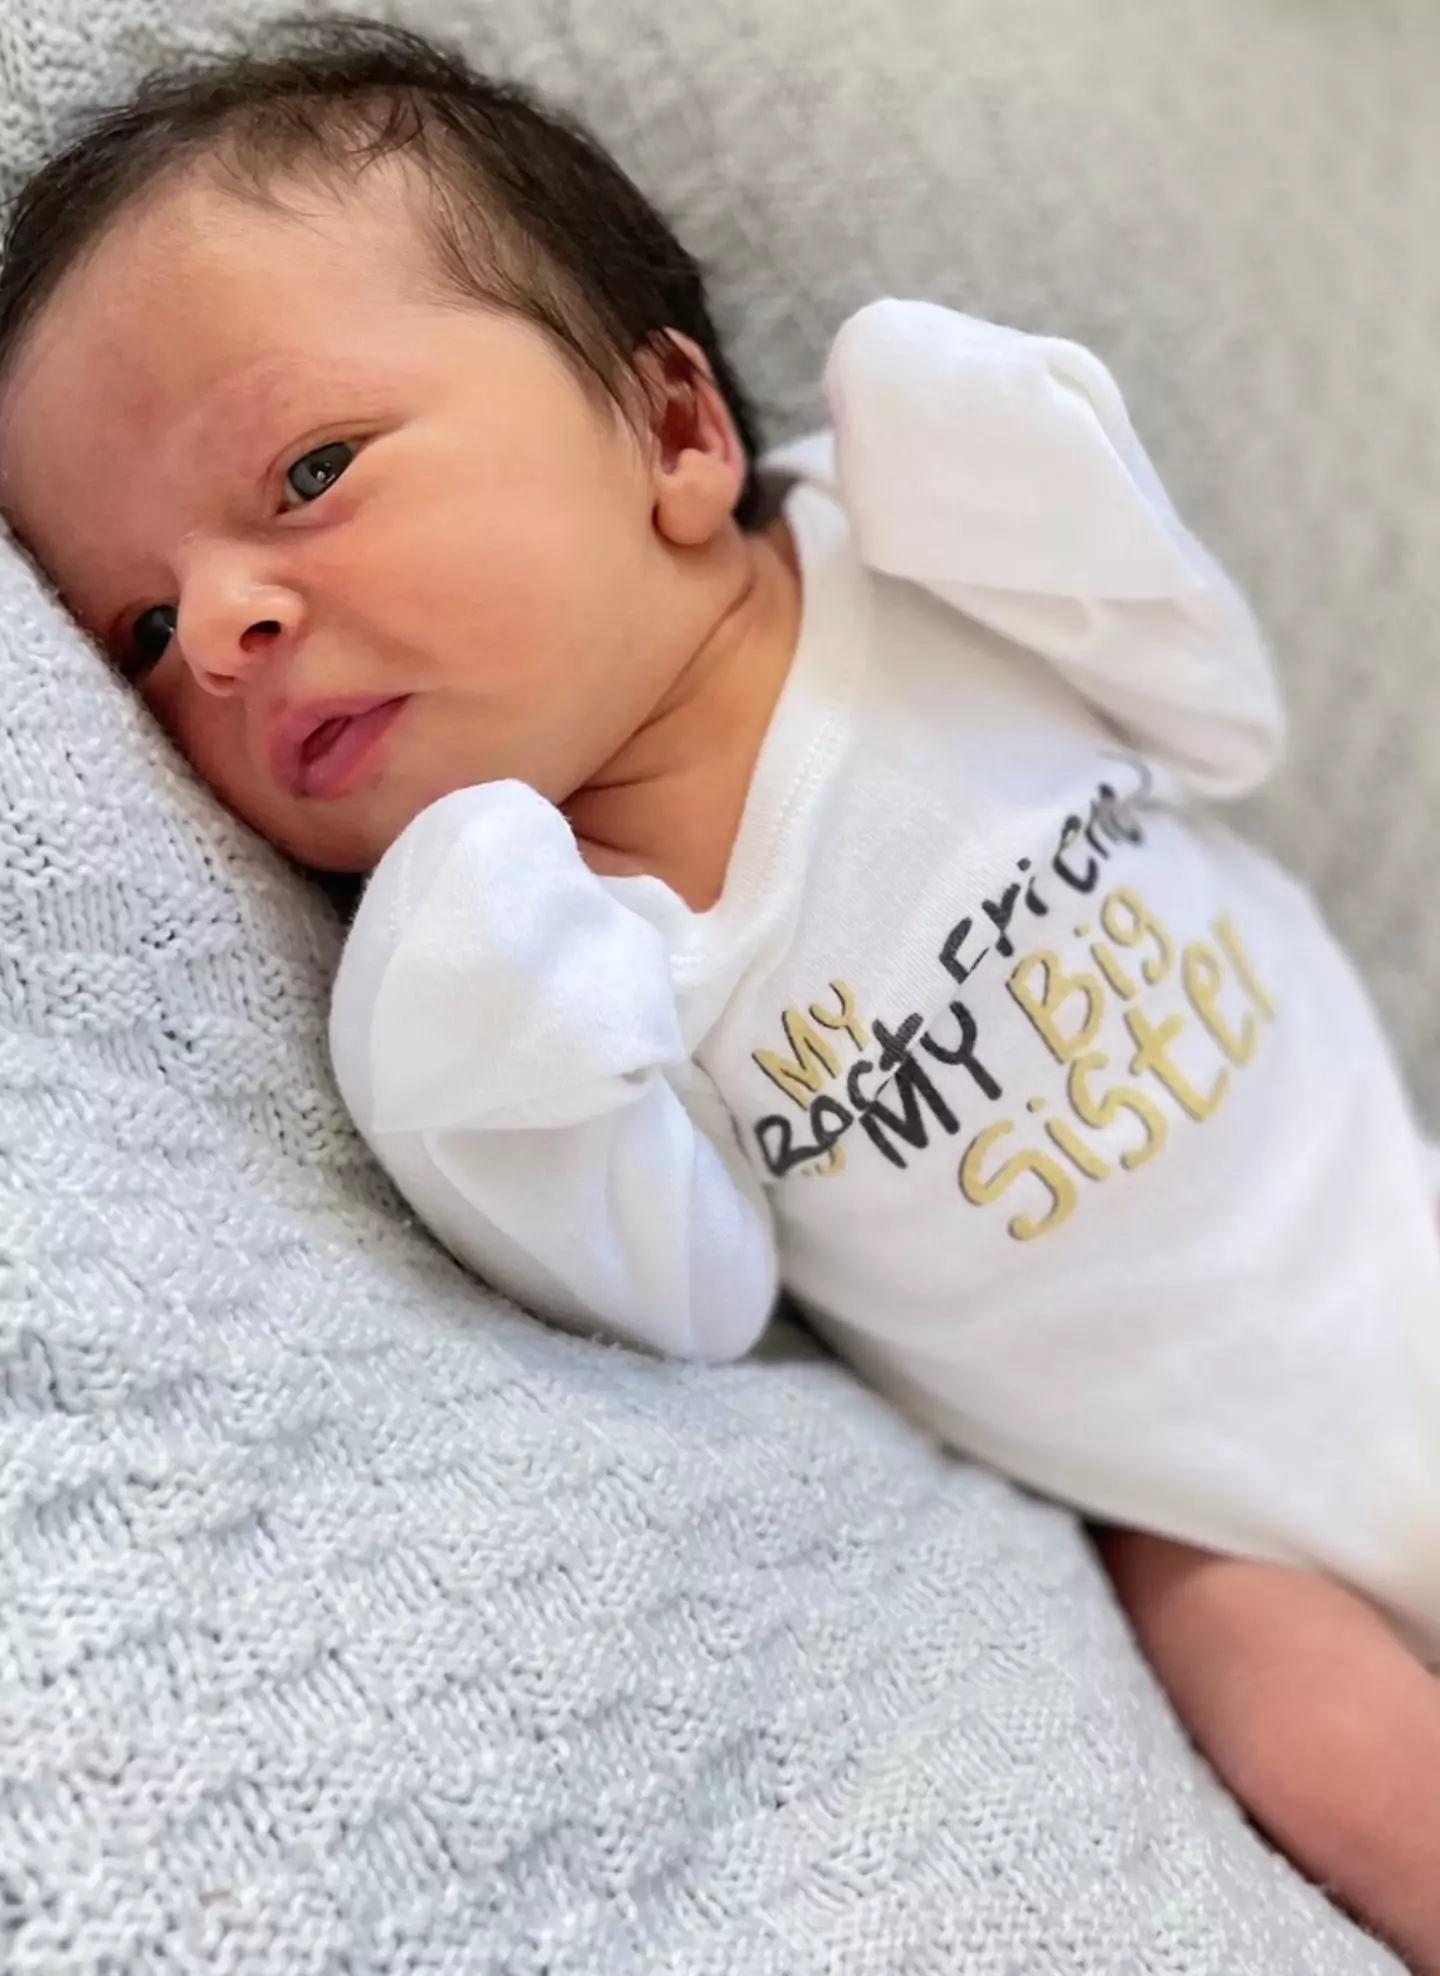 The family welcomed baby Freddie in December 2022.